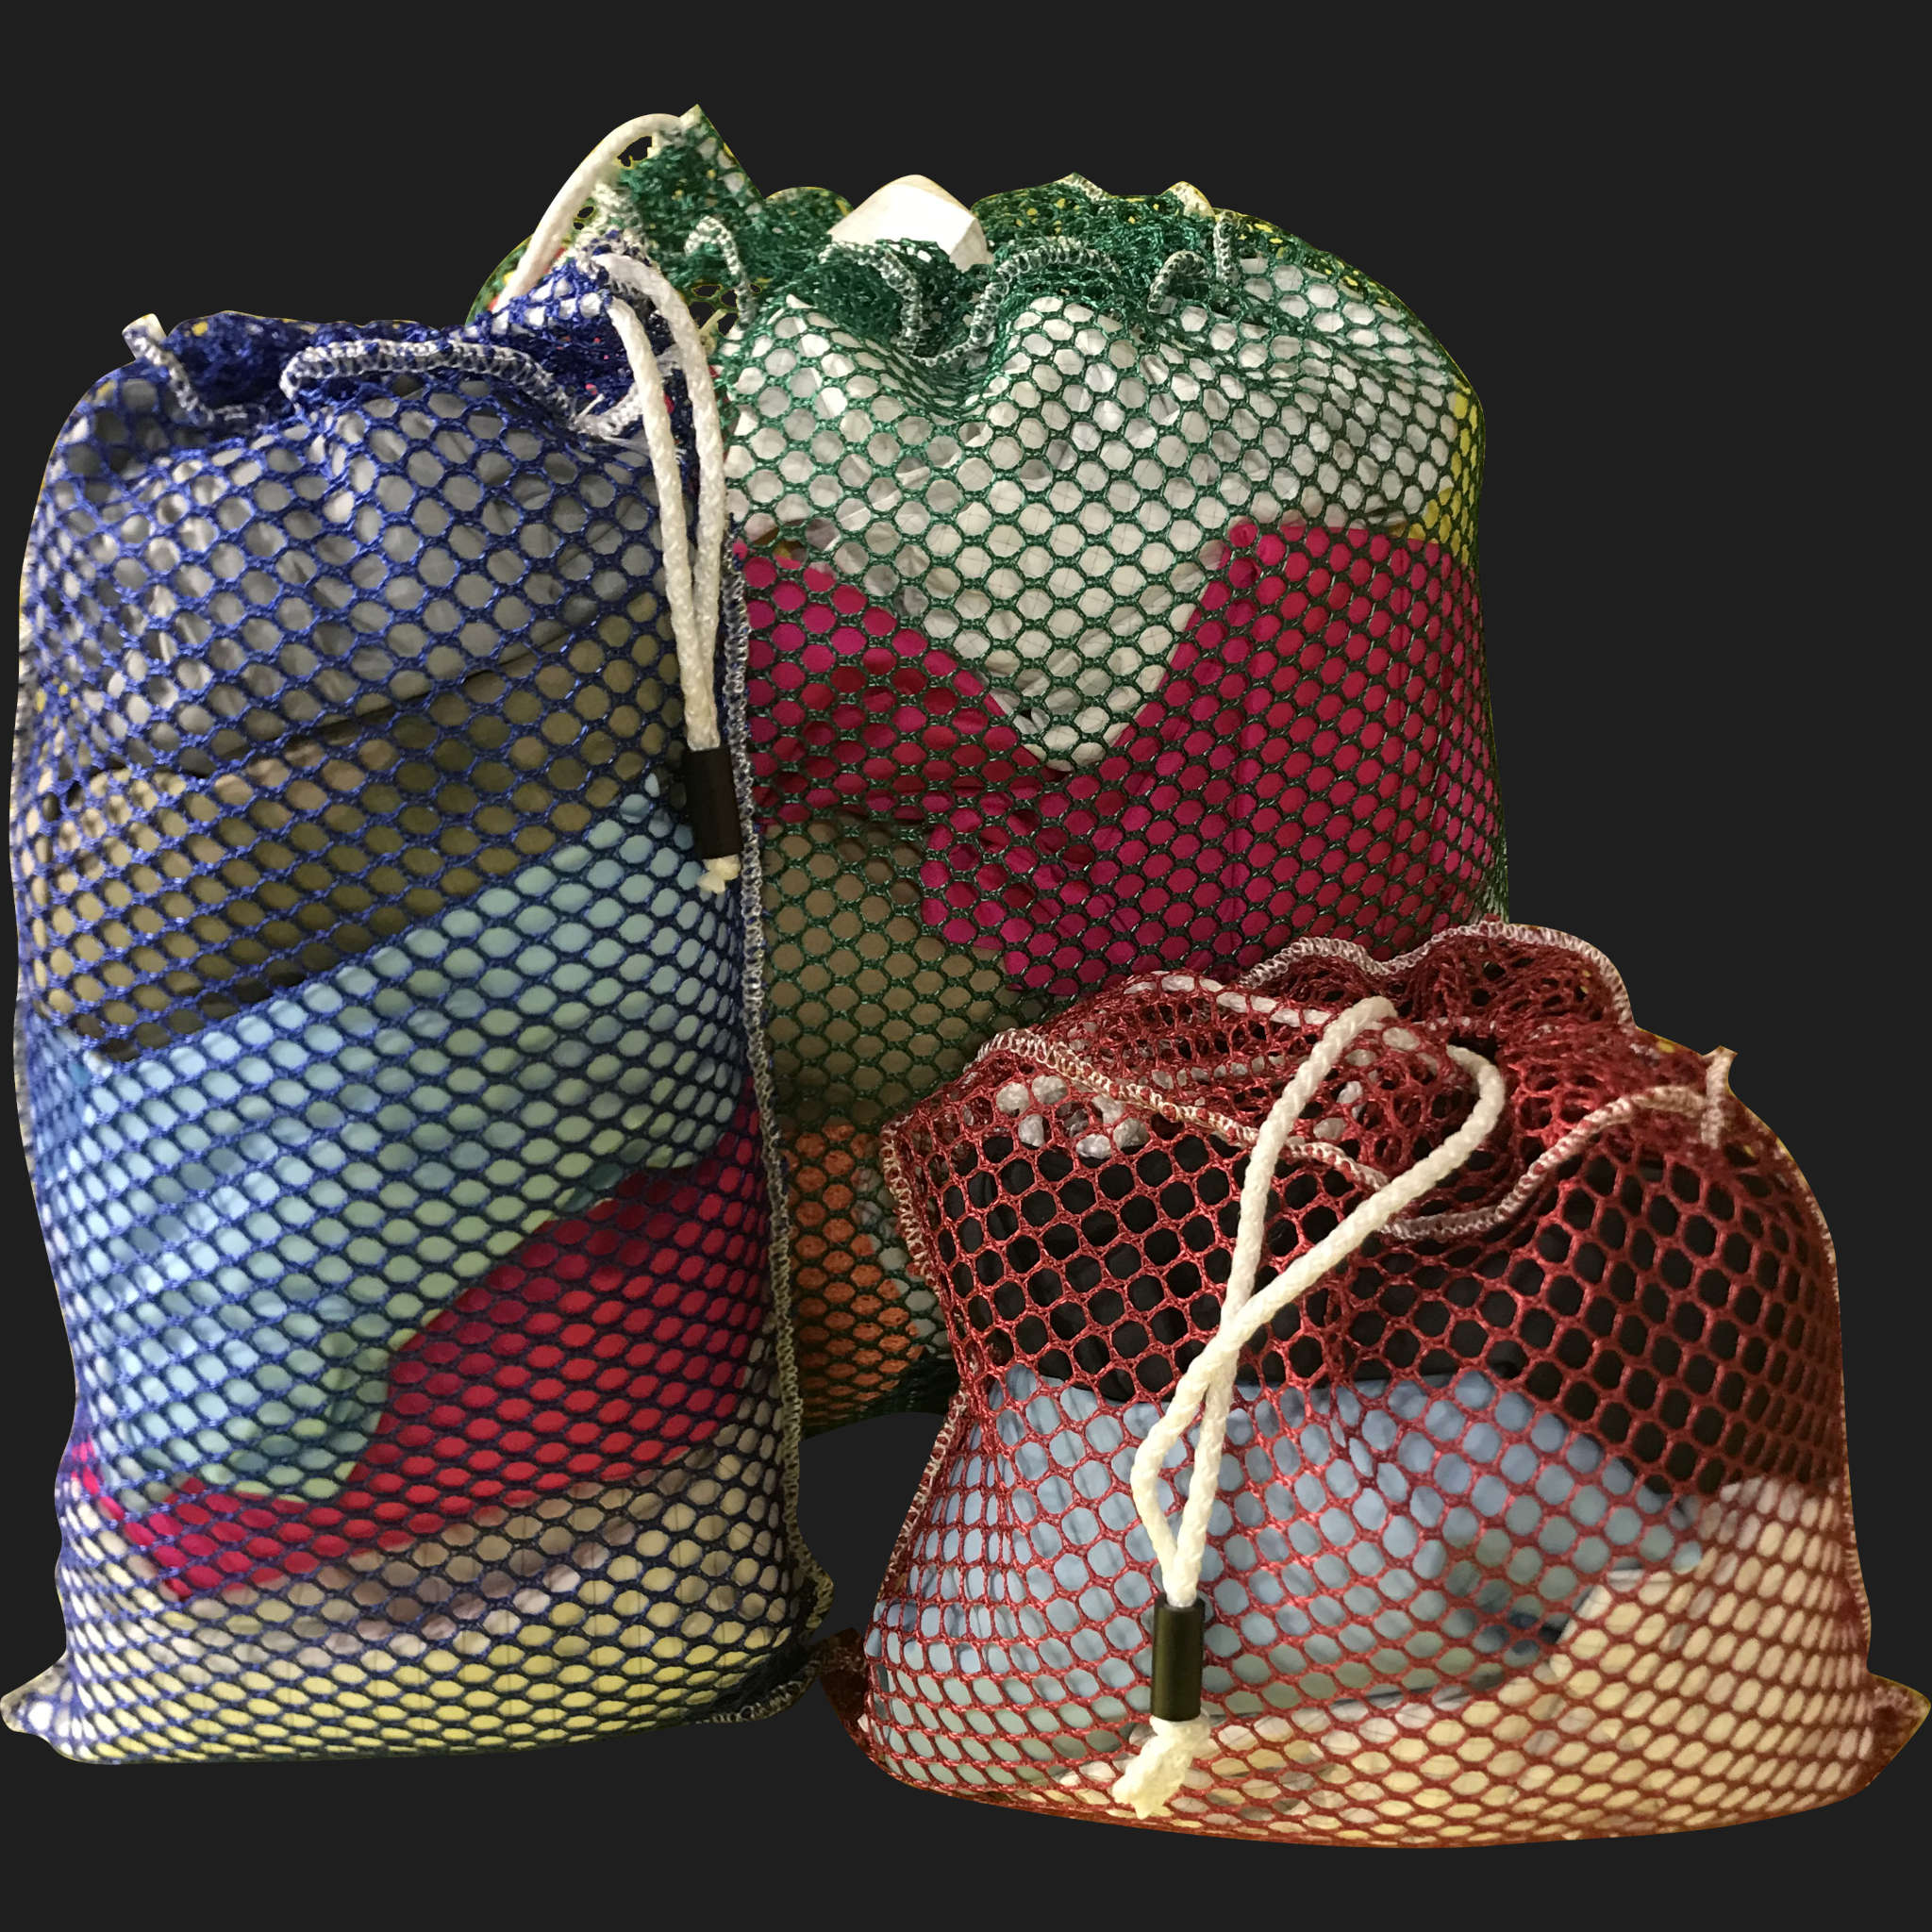 16" x 26" Customized Mesh-Net-Laundry Bags Heavy Duty with Cord and barrellock closure